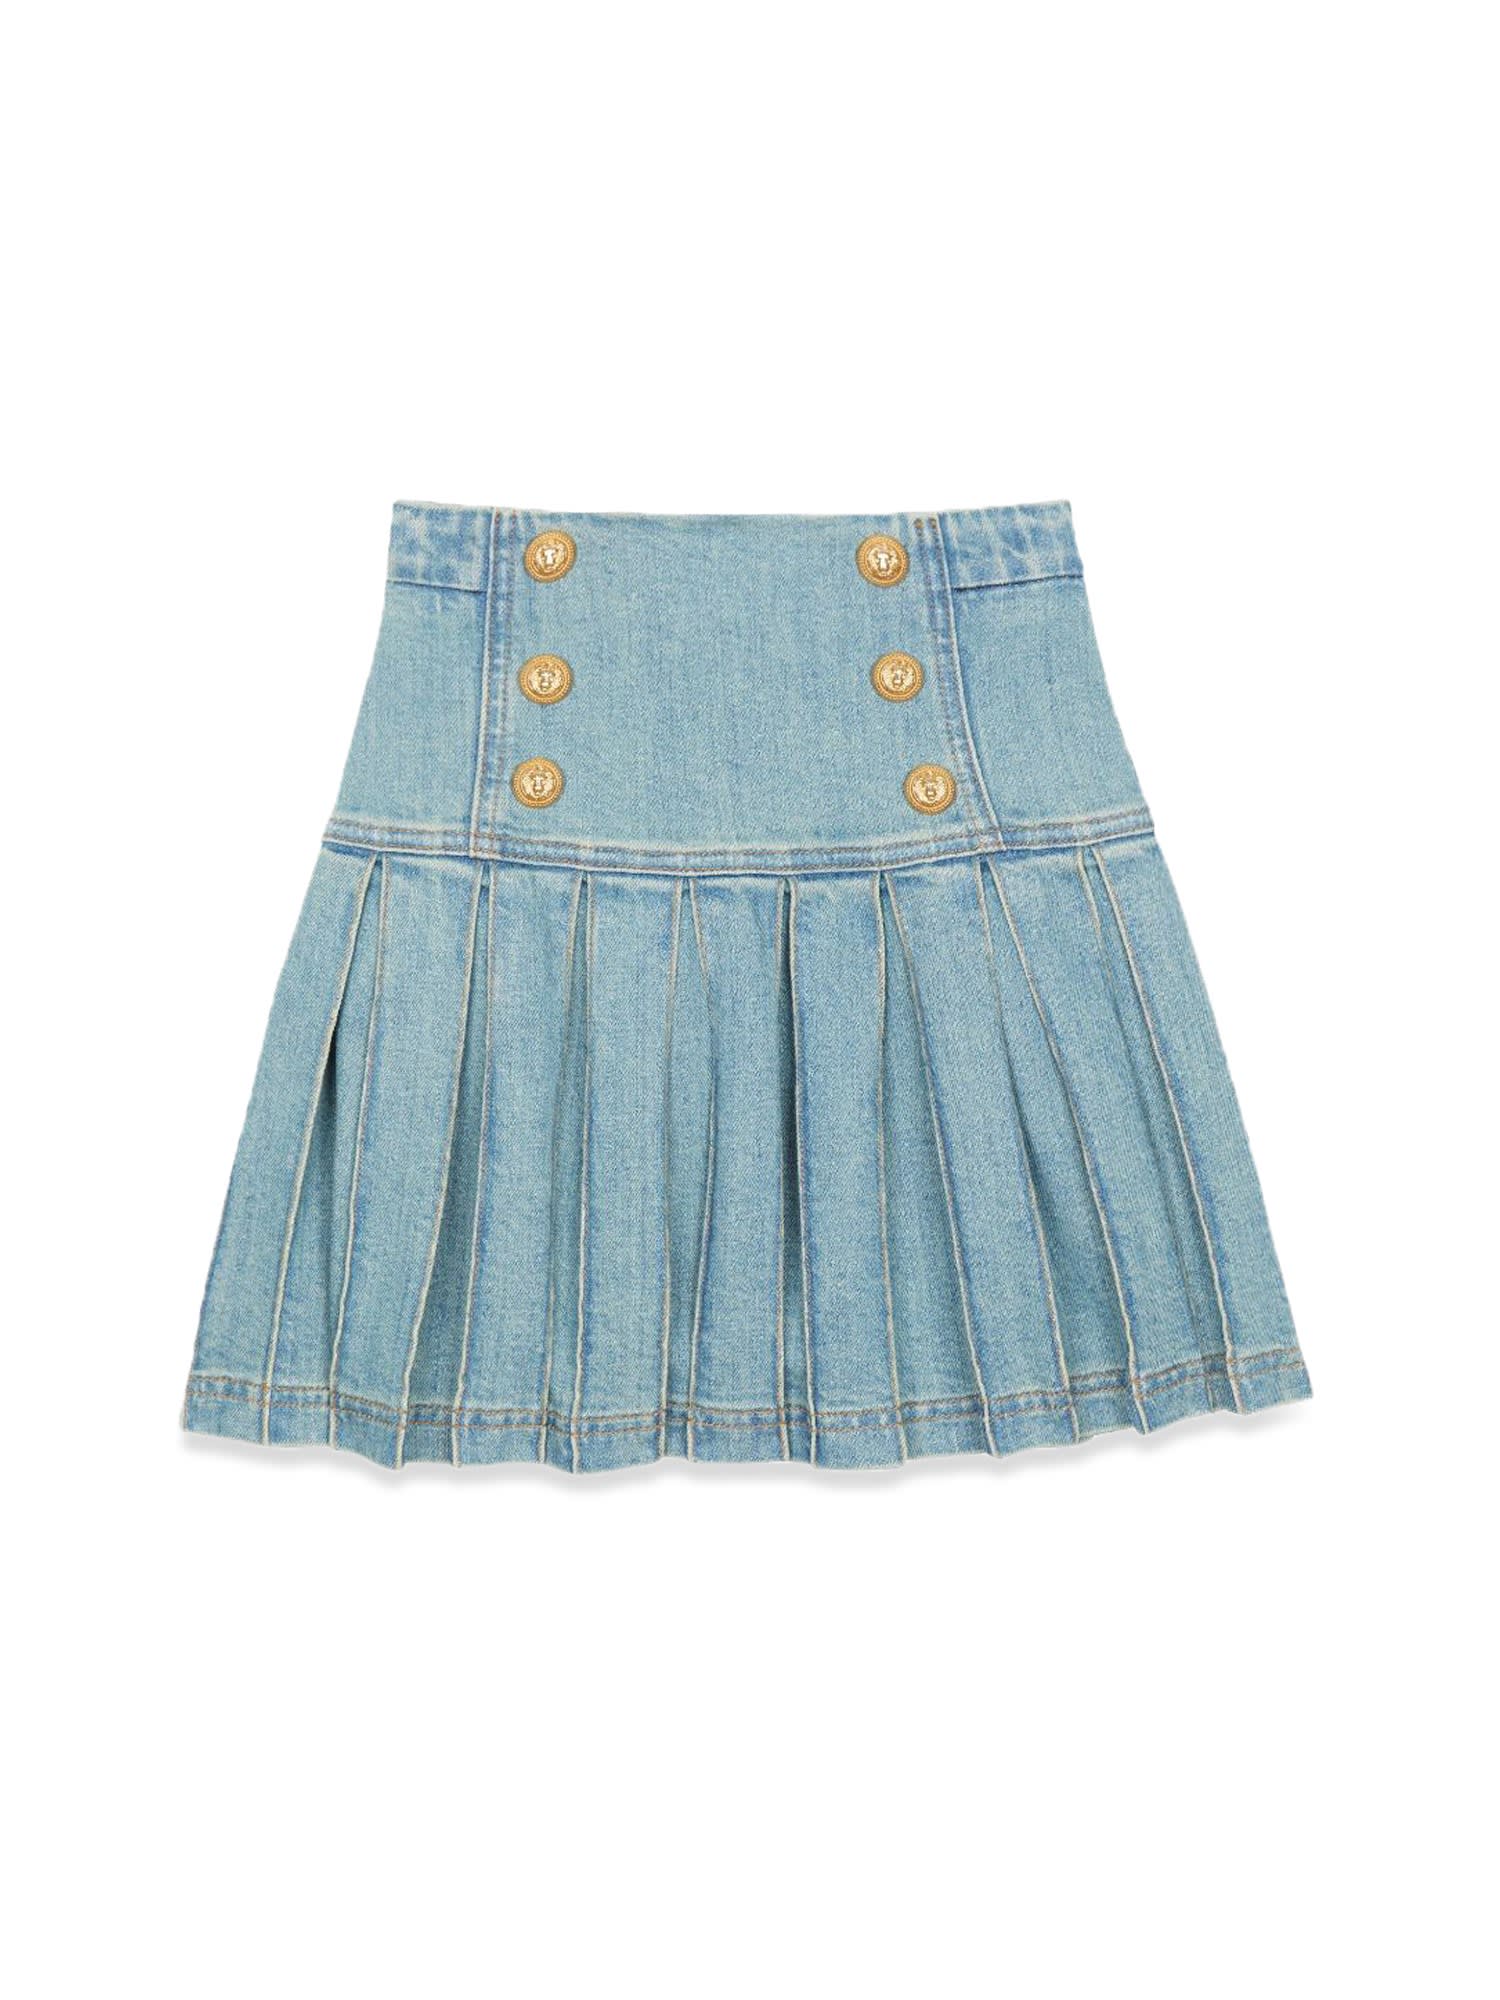 BALMAIN PLEATED SKIRT WITH BUTTONS